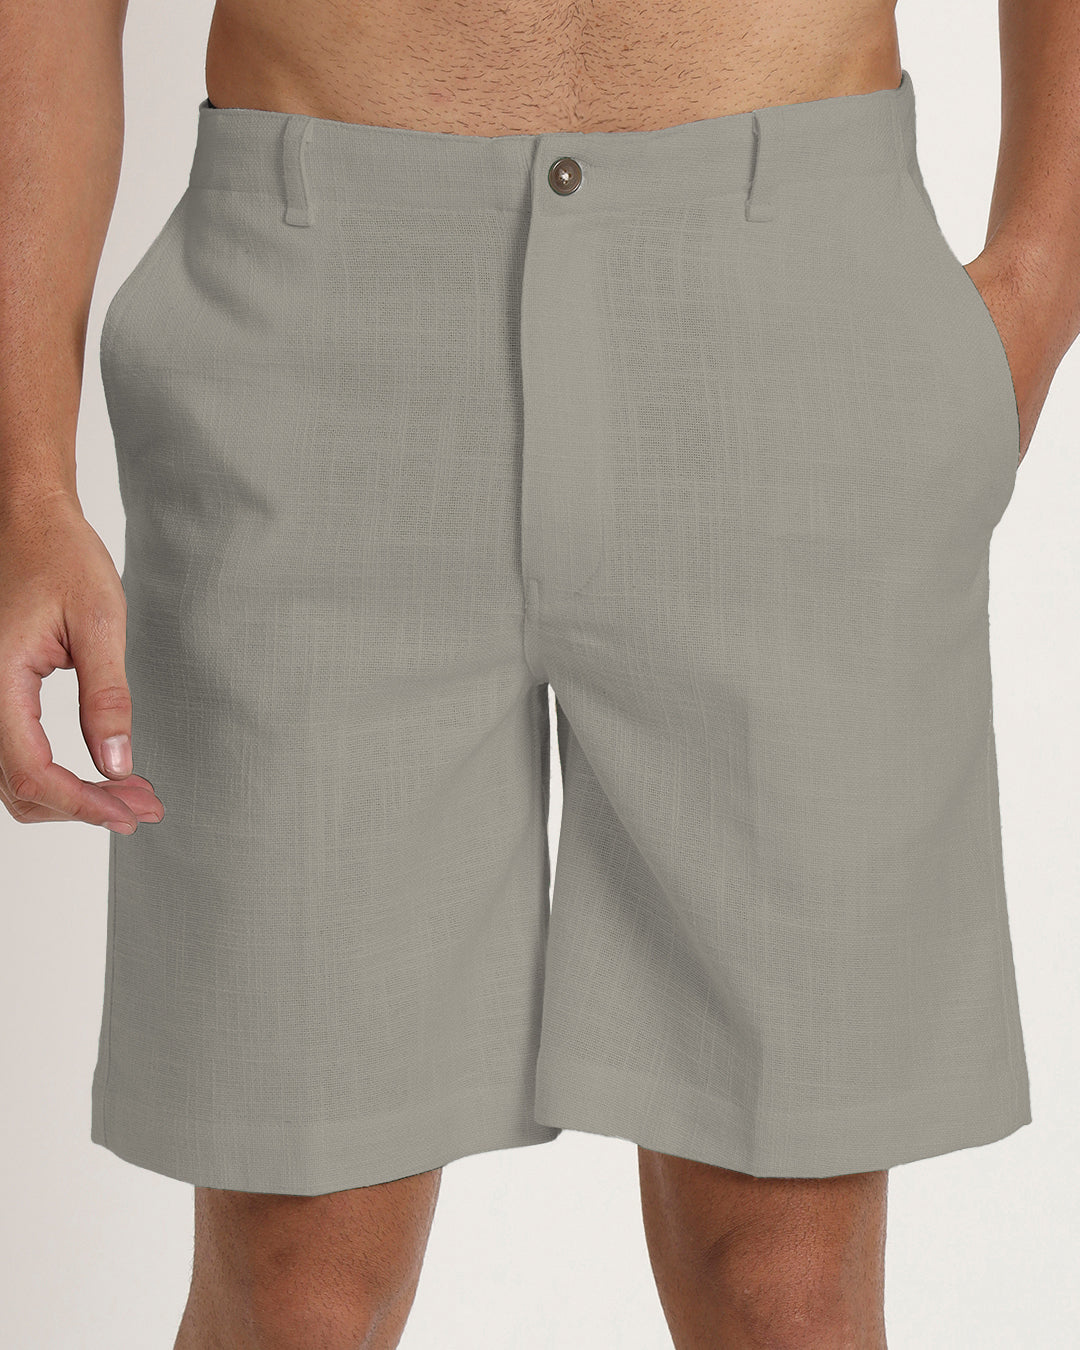 Ready For Anything Iced Grey Men's Shorts